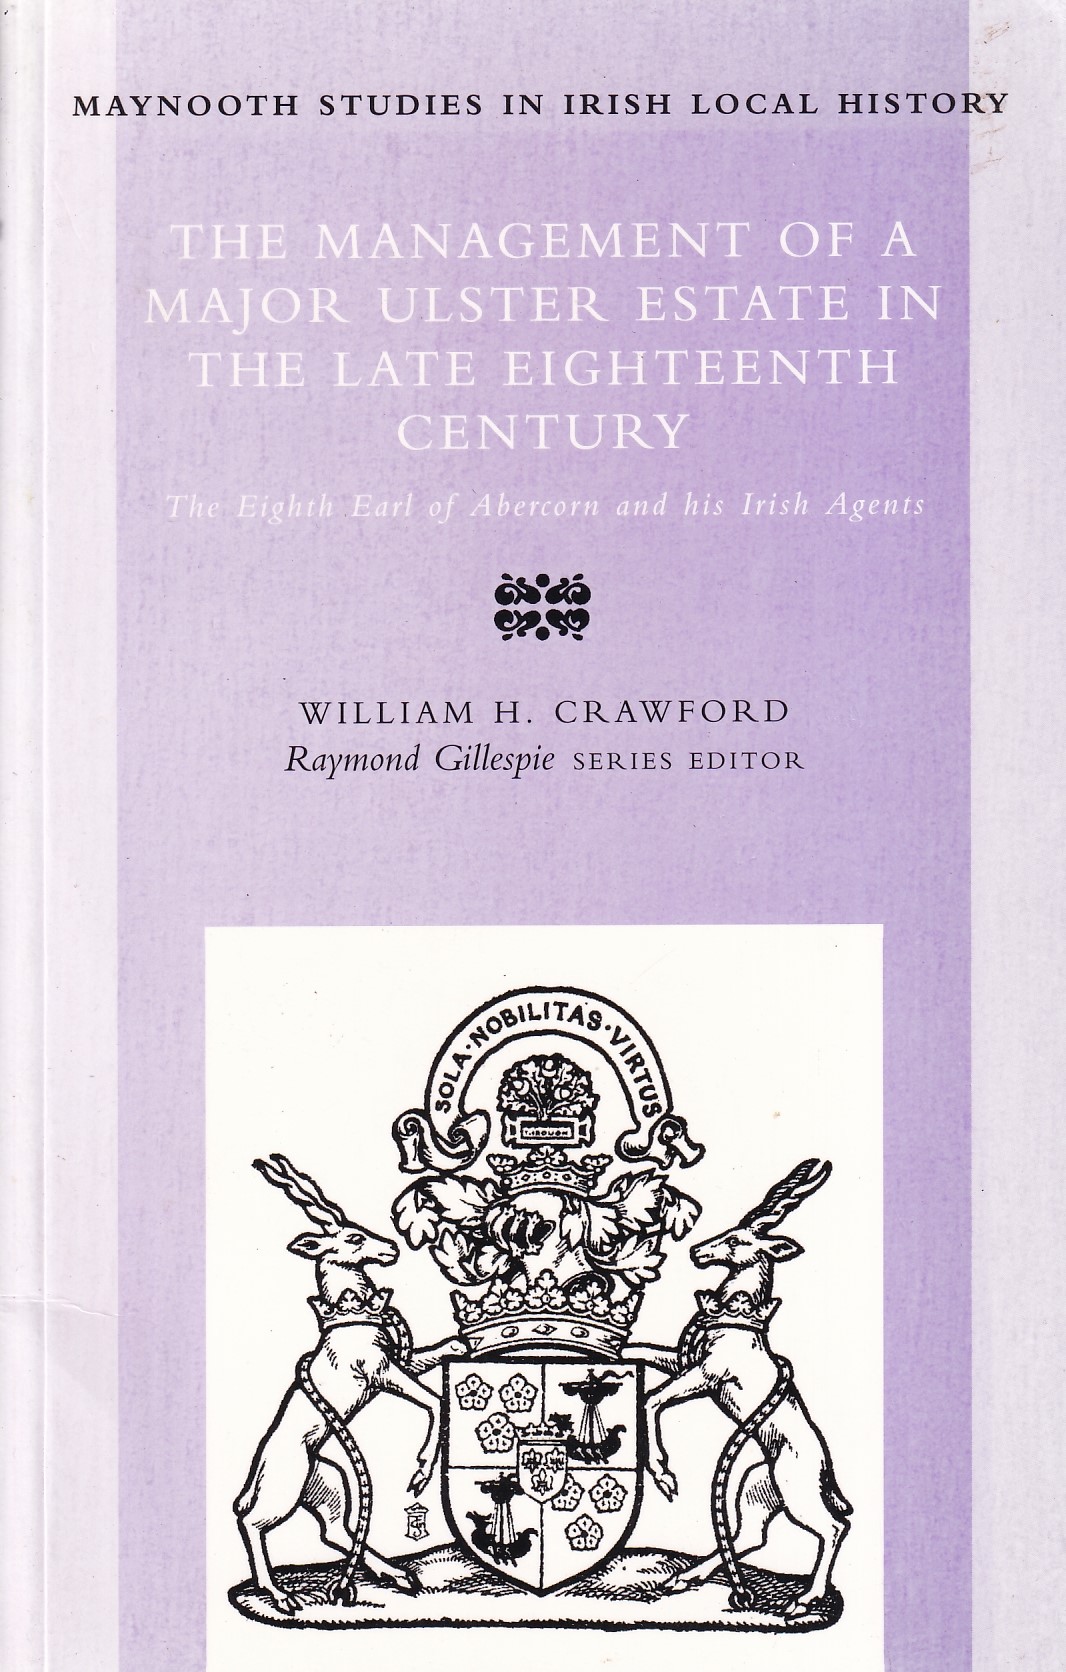 Management of a Major Ulster Estate in the Late Eighteenth Century: The Eighth Earl of Abercorn and His Irish Agents by William H. Crawford